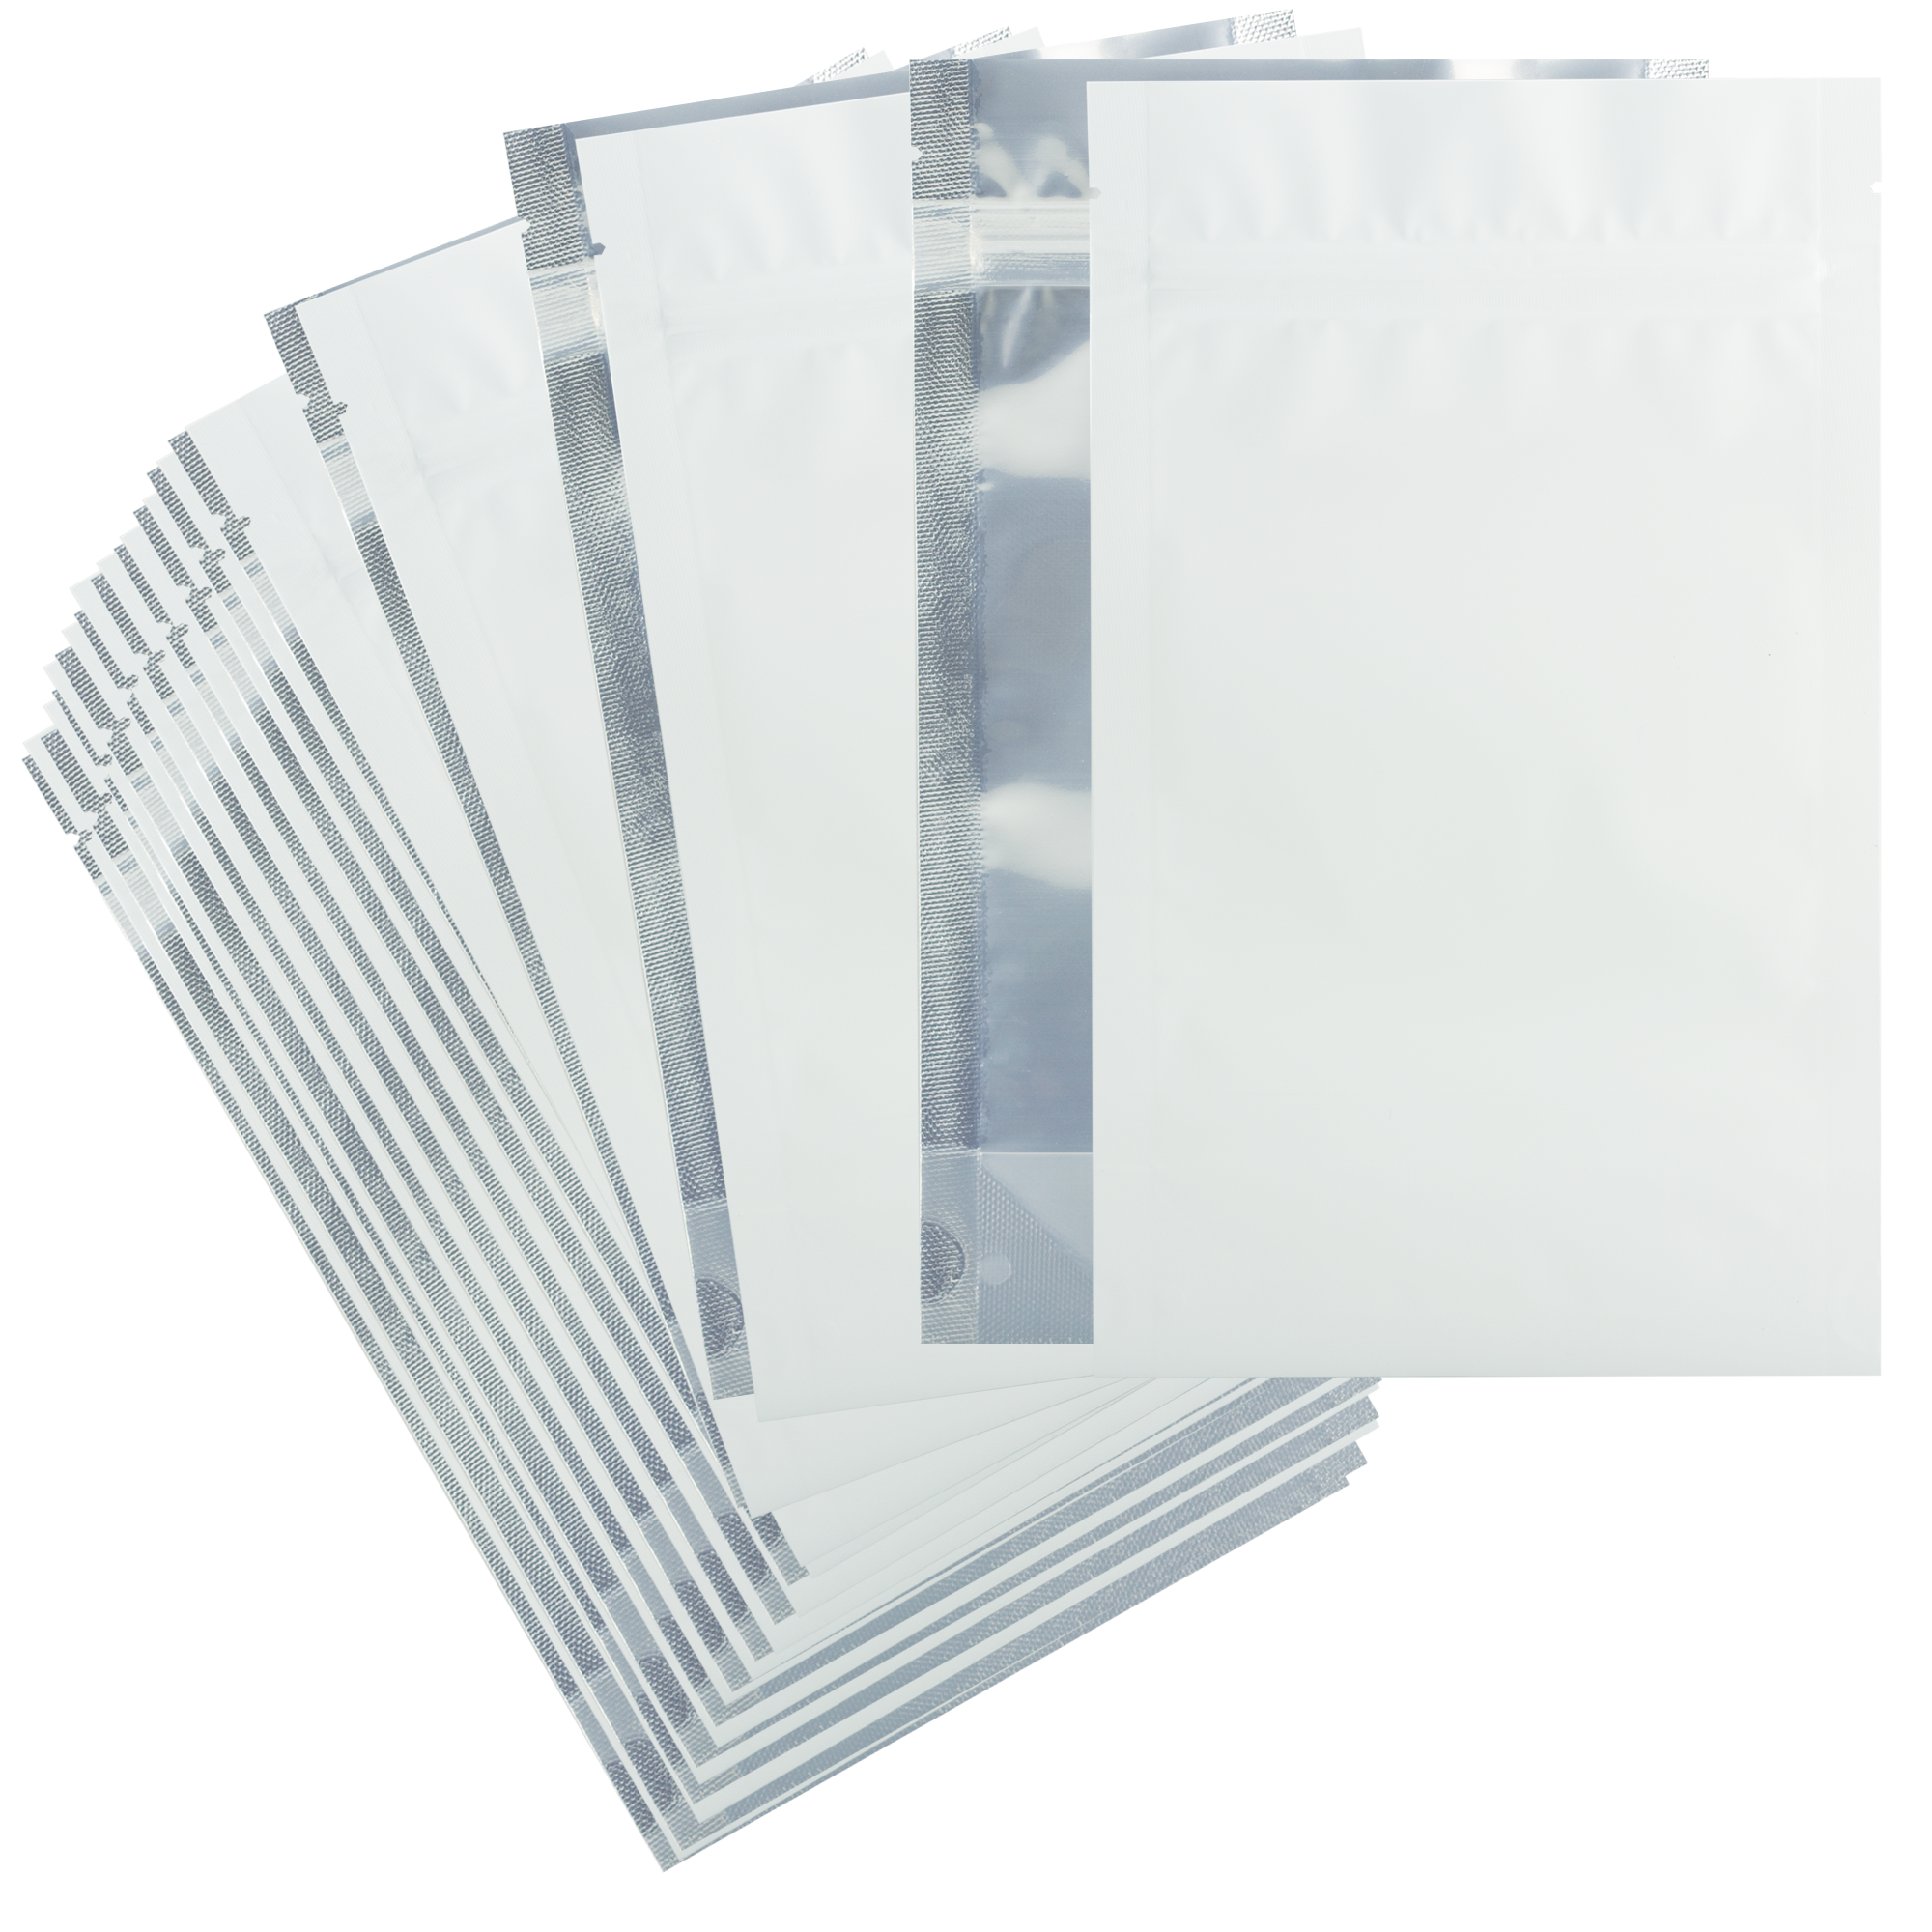 1/8th Ounce Matte Finish Solid White Smell Proof Mylar Bags